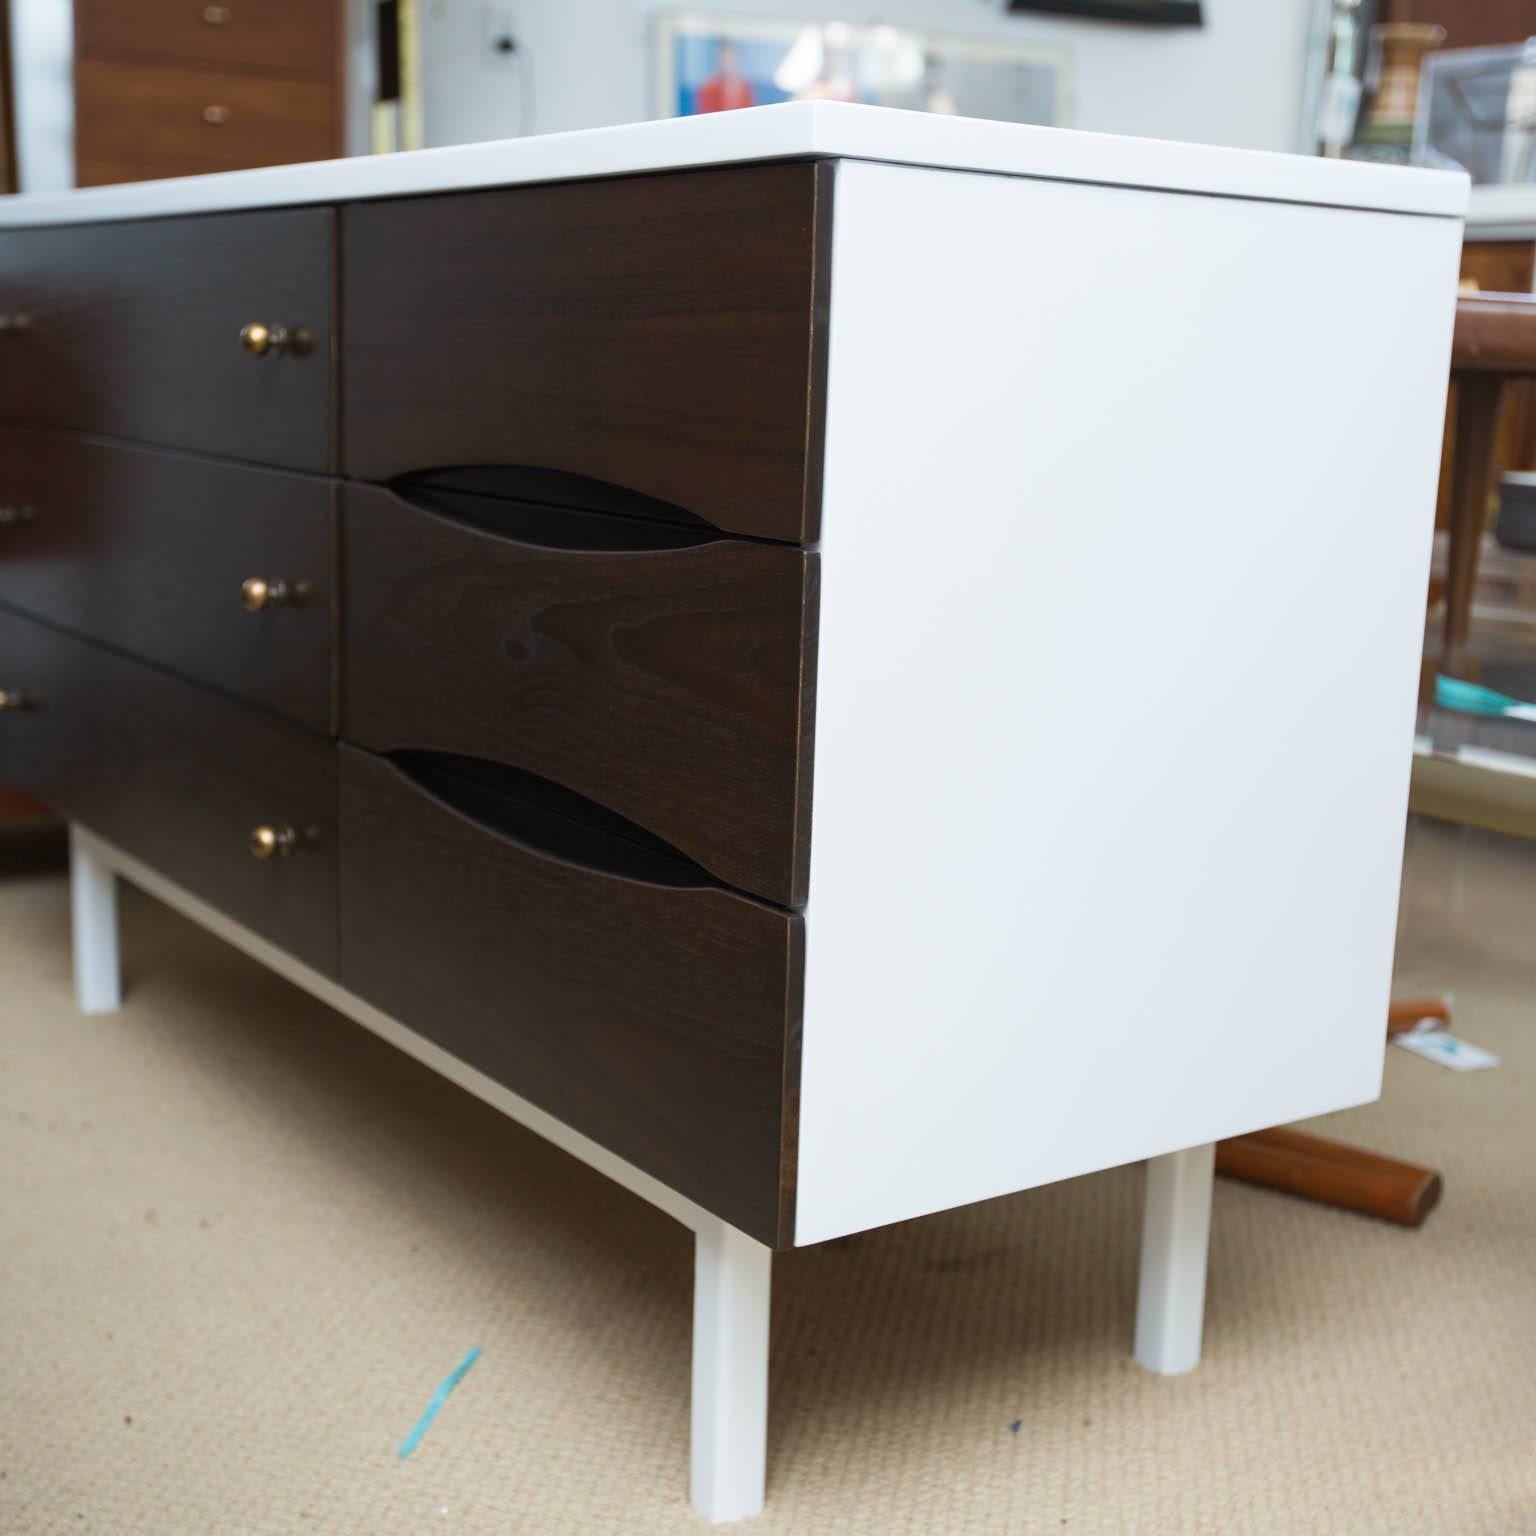 20th Century Mid-Century Modern Lacquered Low Dresser by Stanley Furniture